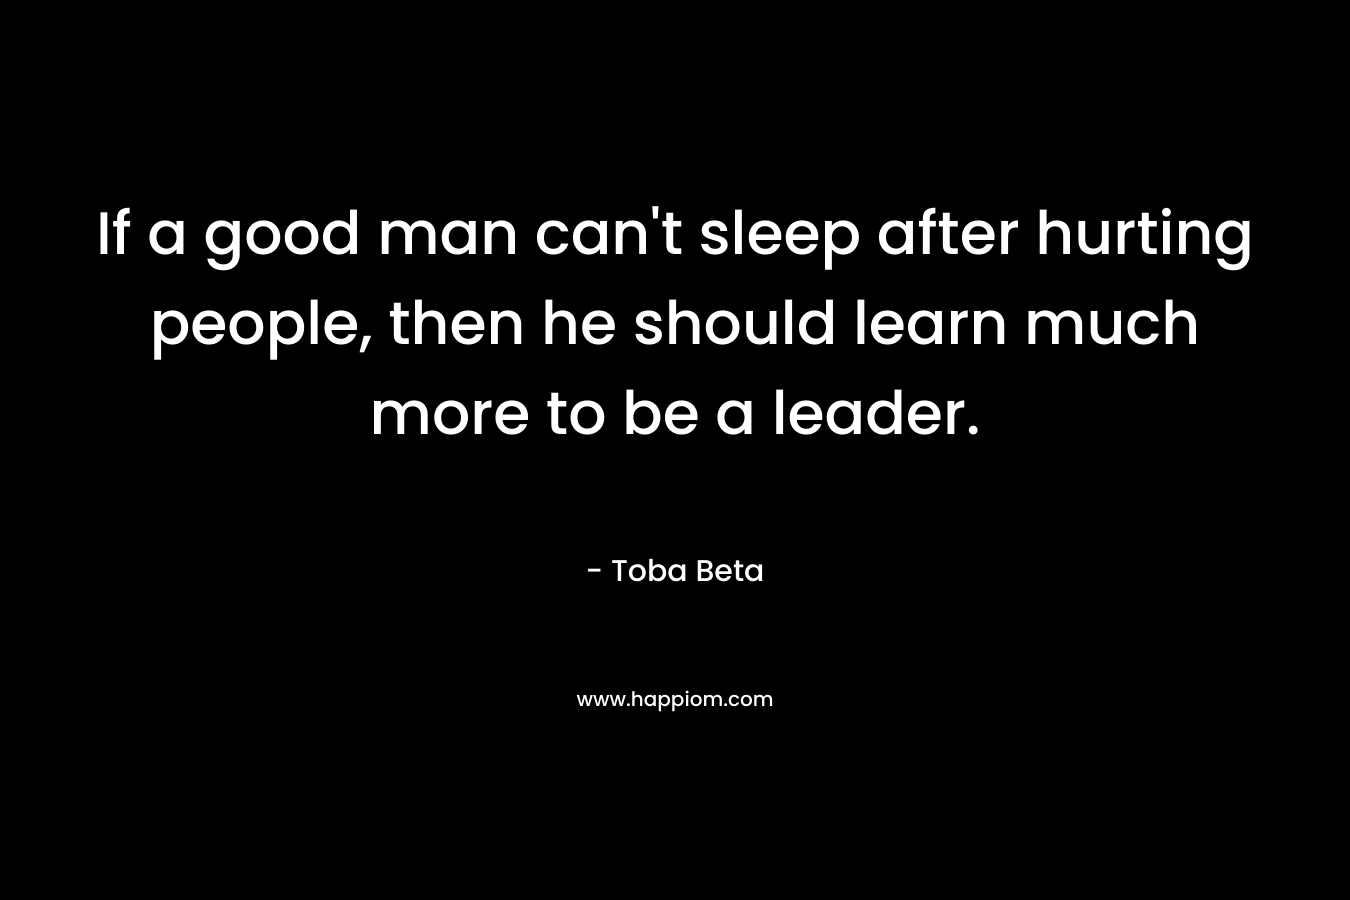 If a good man can’t sleep after hurting people, then he should learn much more to be a leader. – Toba Beta